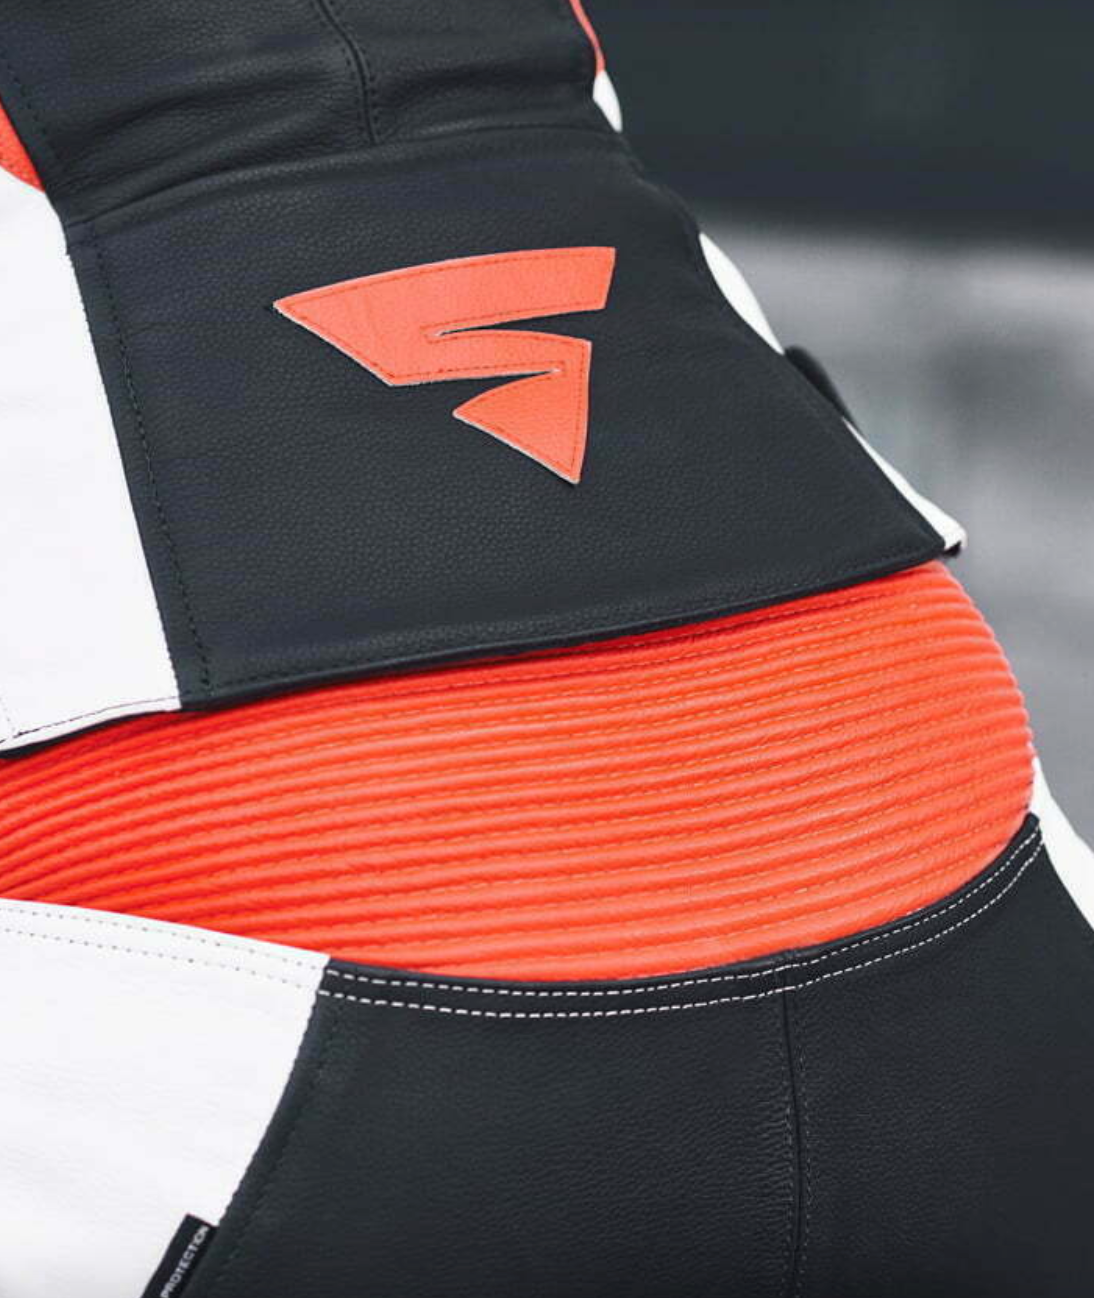 Shima logo on a back of black, white and red fluo leather motorcycle suit